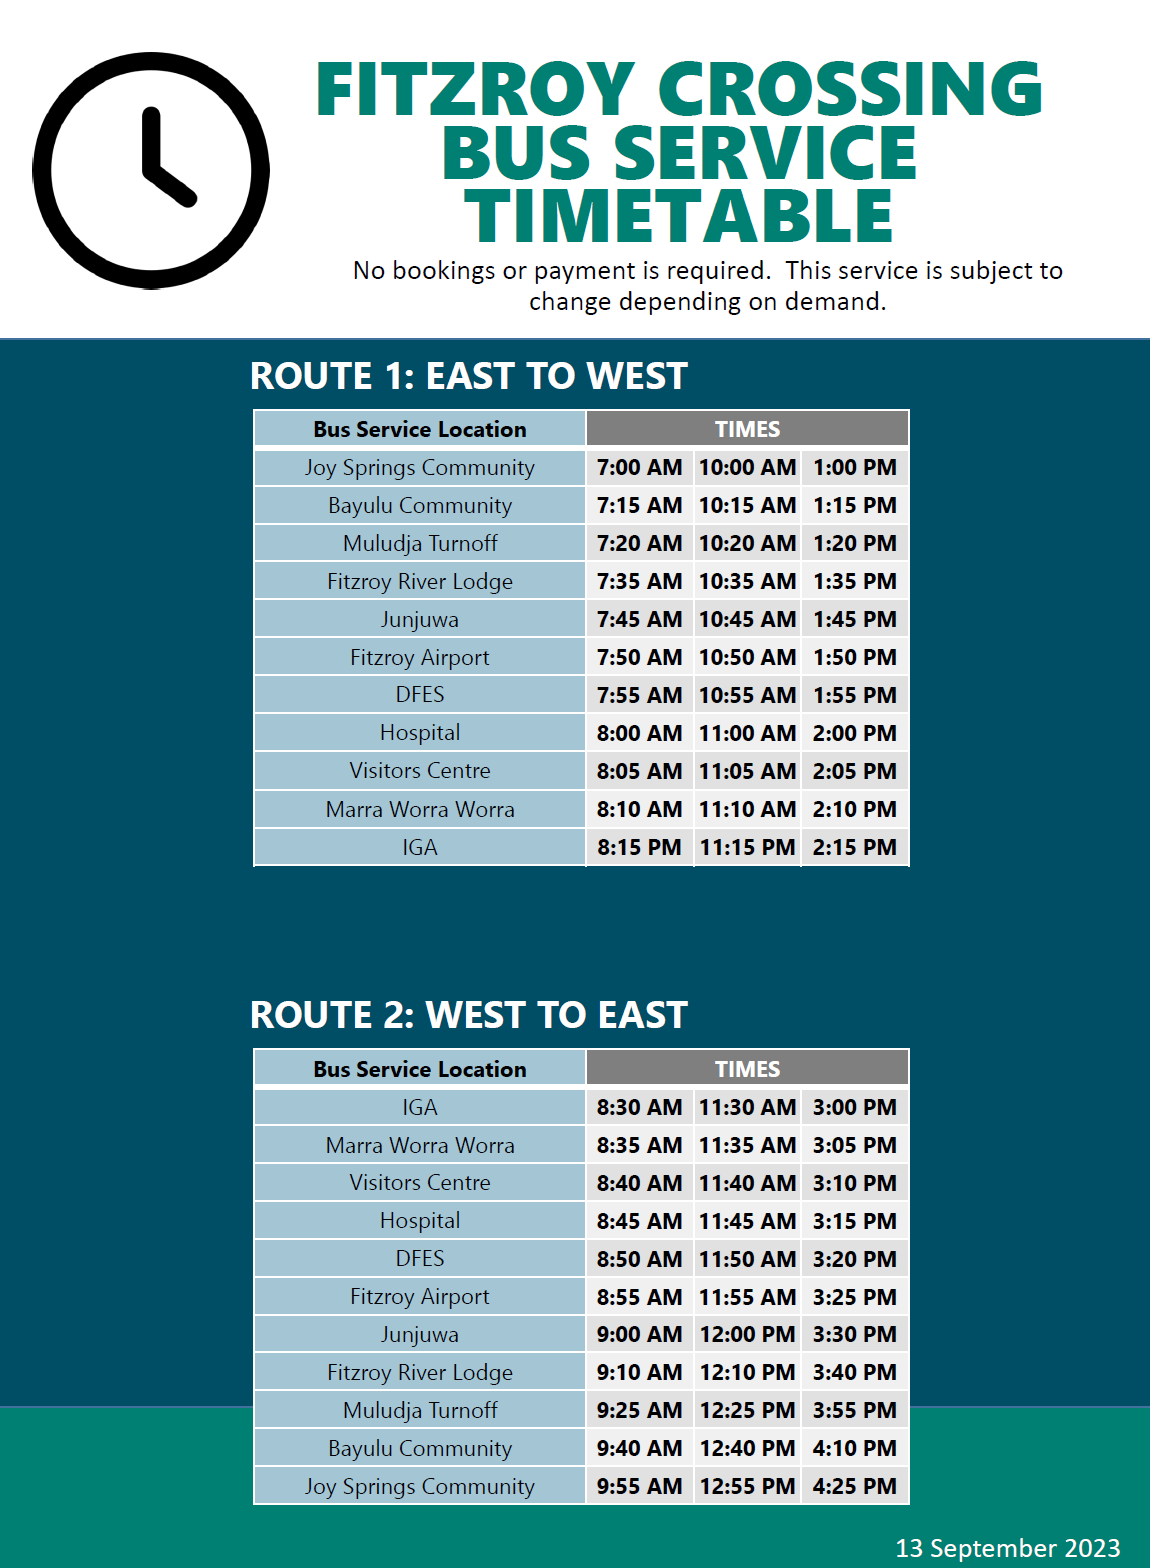 Fitzroy Crossing Bus Timetable - Sep 23 - Image